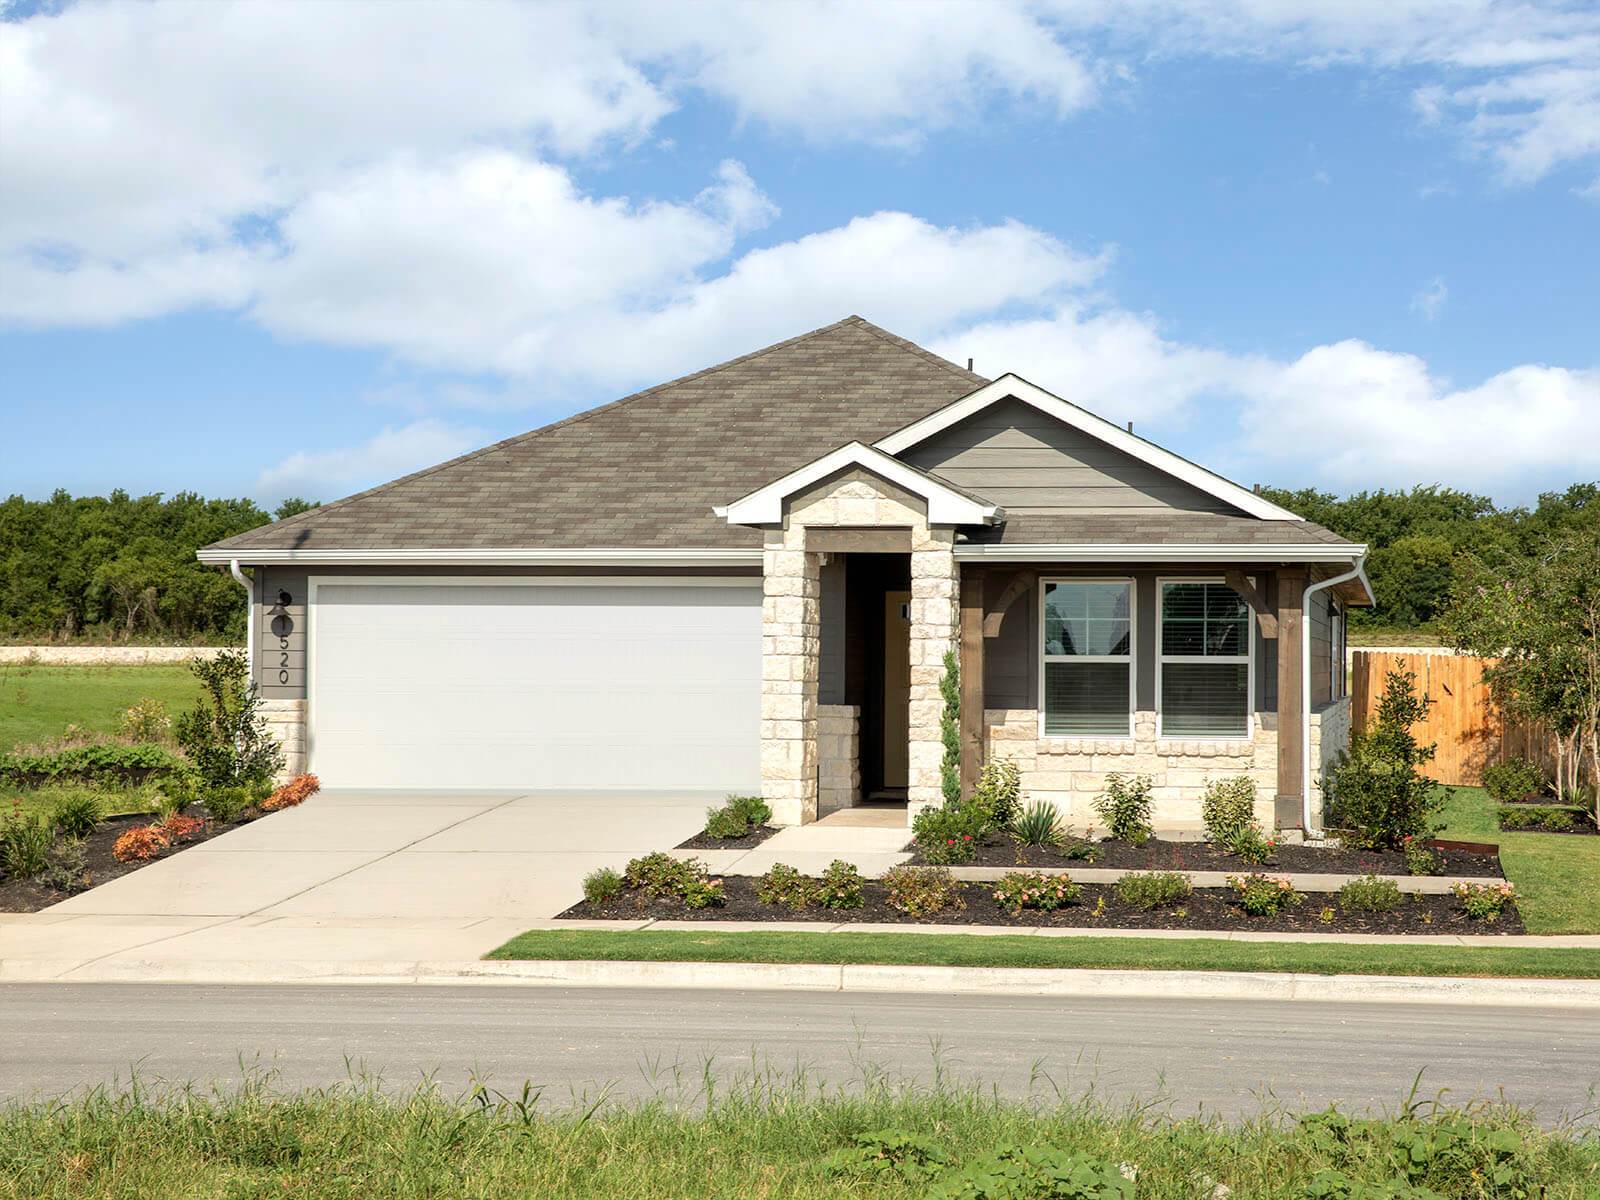 Homestead at Old Settlers Park offers functional floorplans with gorgeous exteriors.